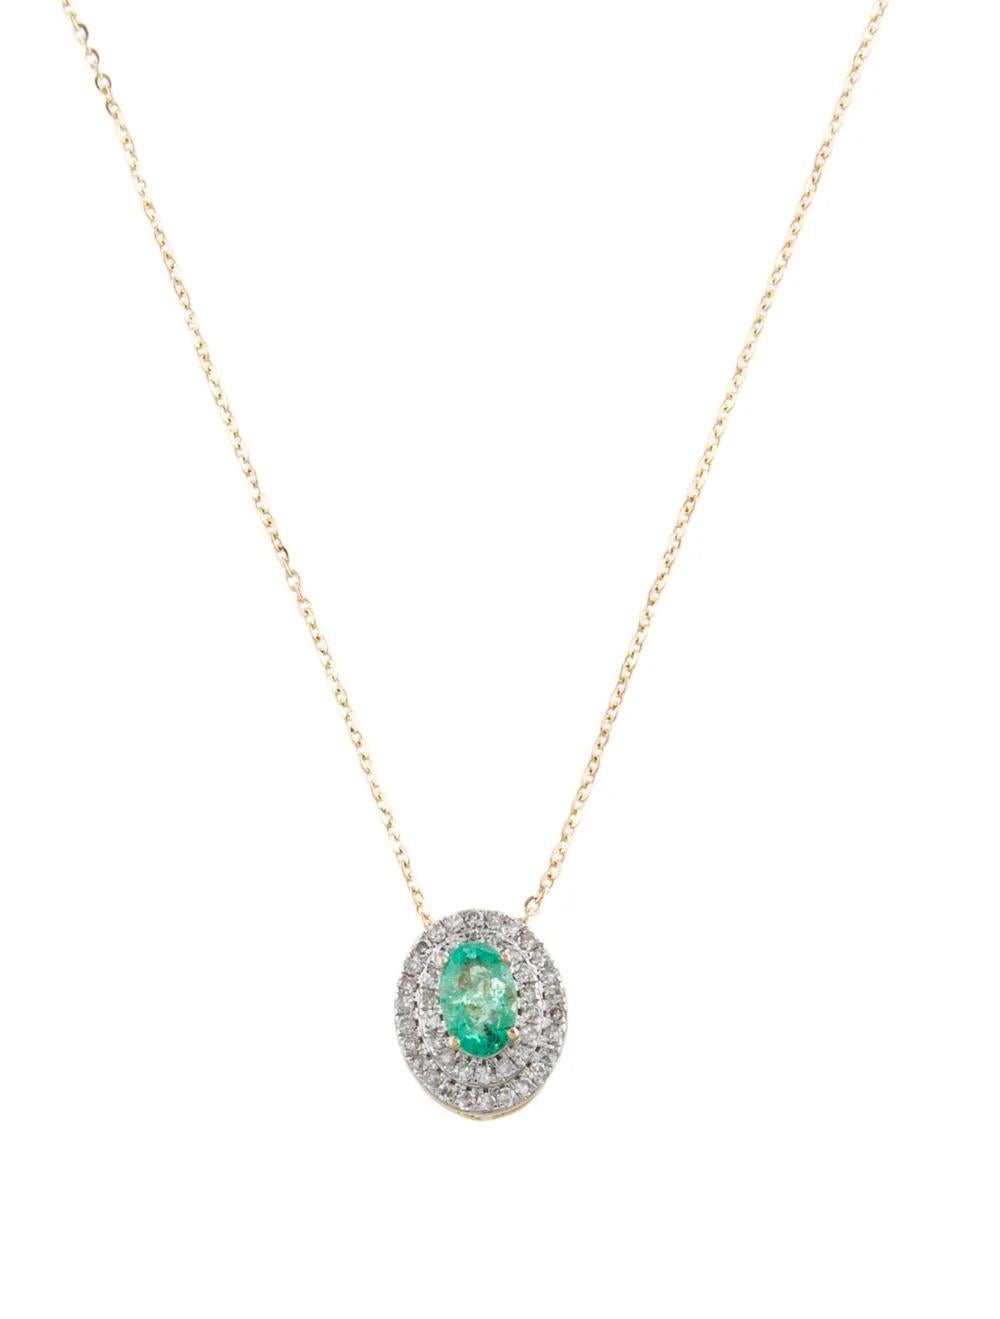 Elevate your elegance with this enchanting 14K Yellow Gold pendant necklace, featuring a captivating 0.52 Carat Faceted Oval Emerald embraced by sparkling diamond accents.

SPECIFICATIONS:

* Metal Type: 14K Yellow Gold
* Total Item Weight: 2.5g
*